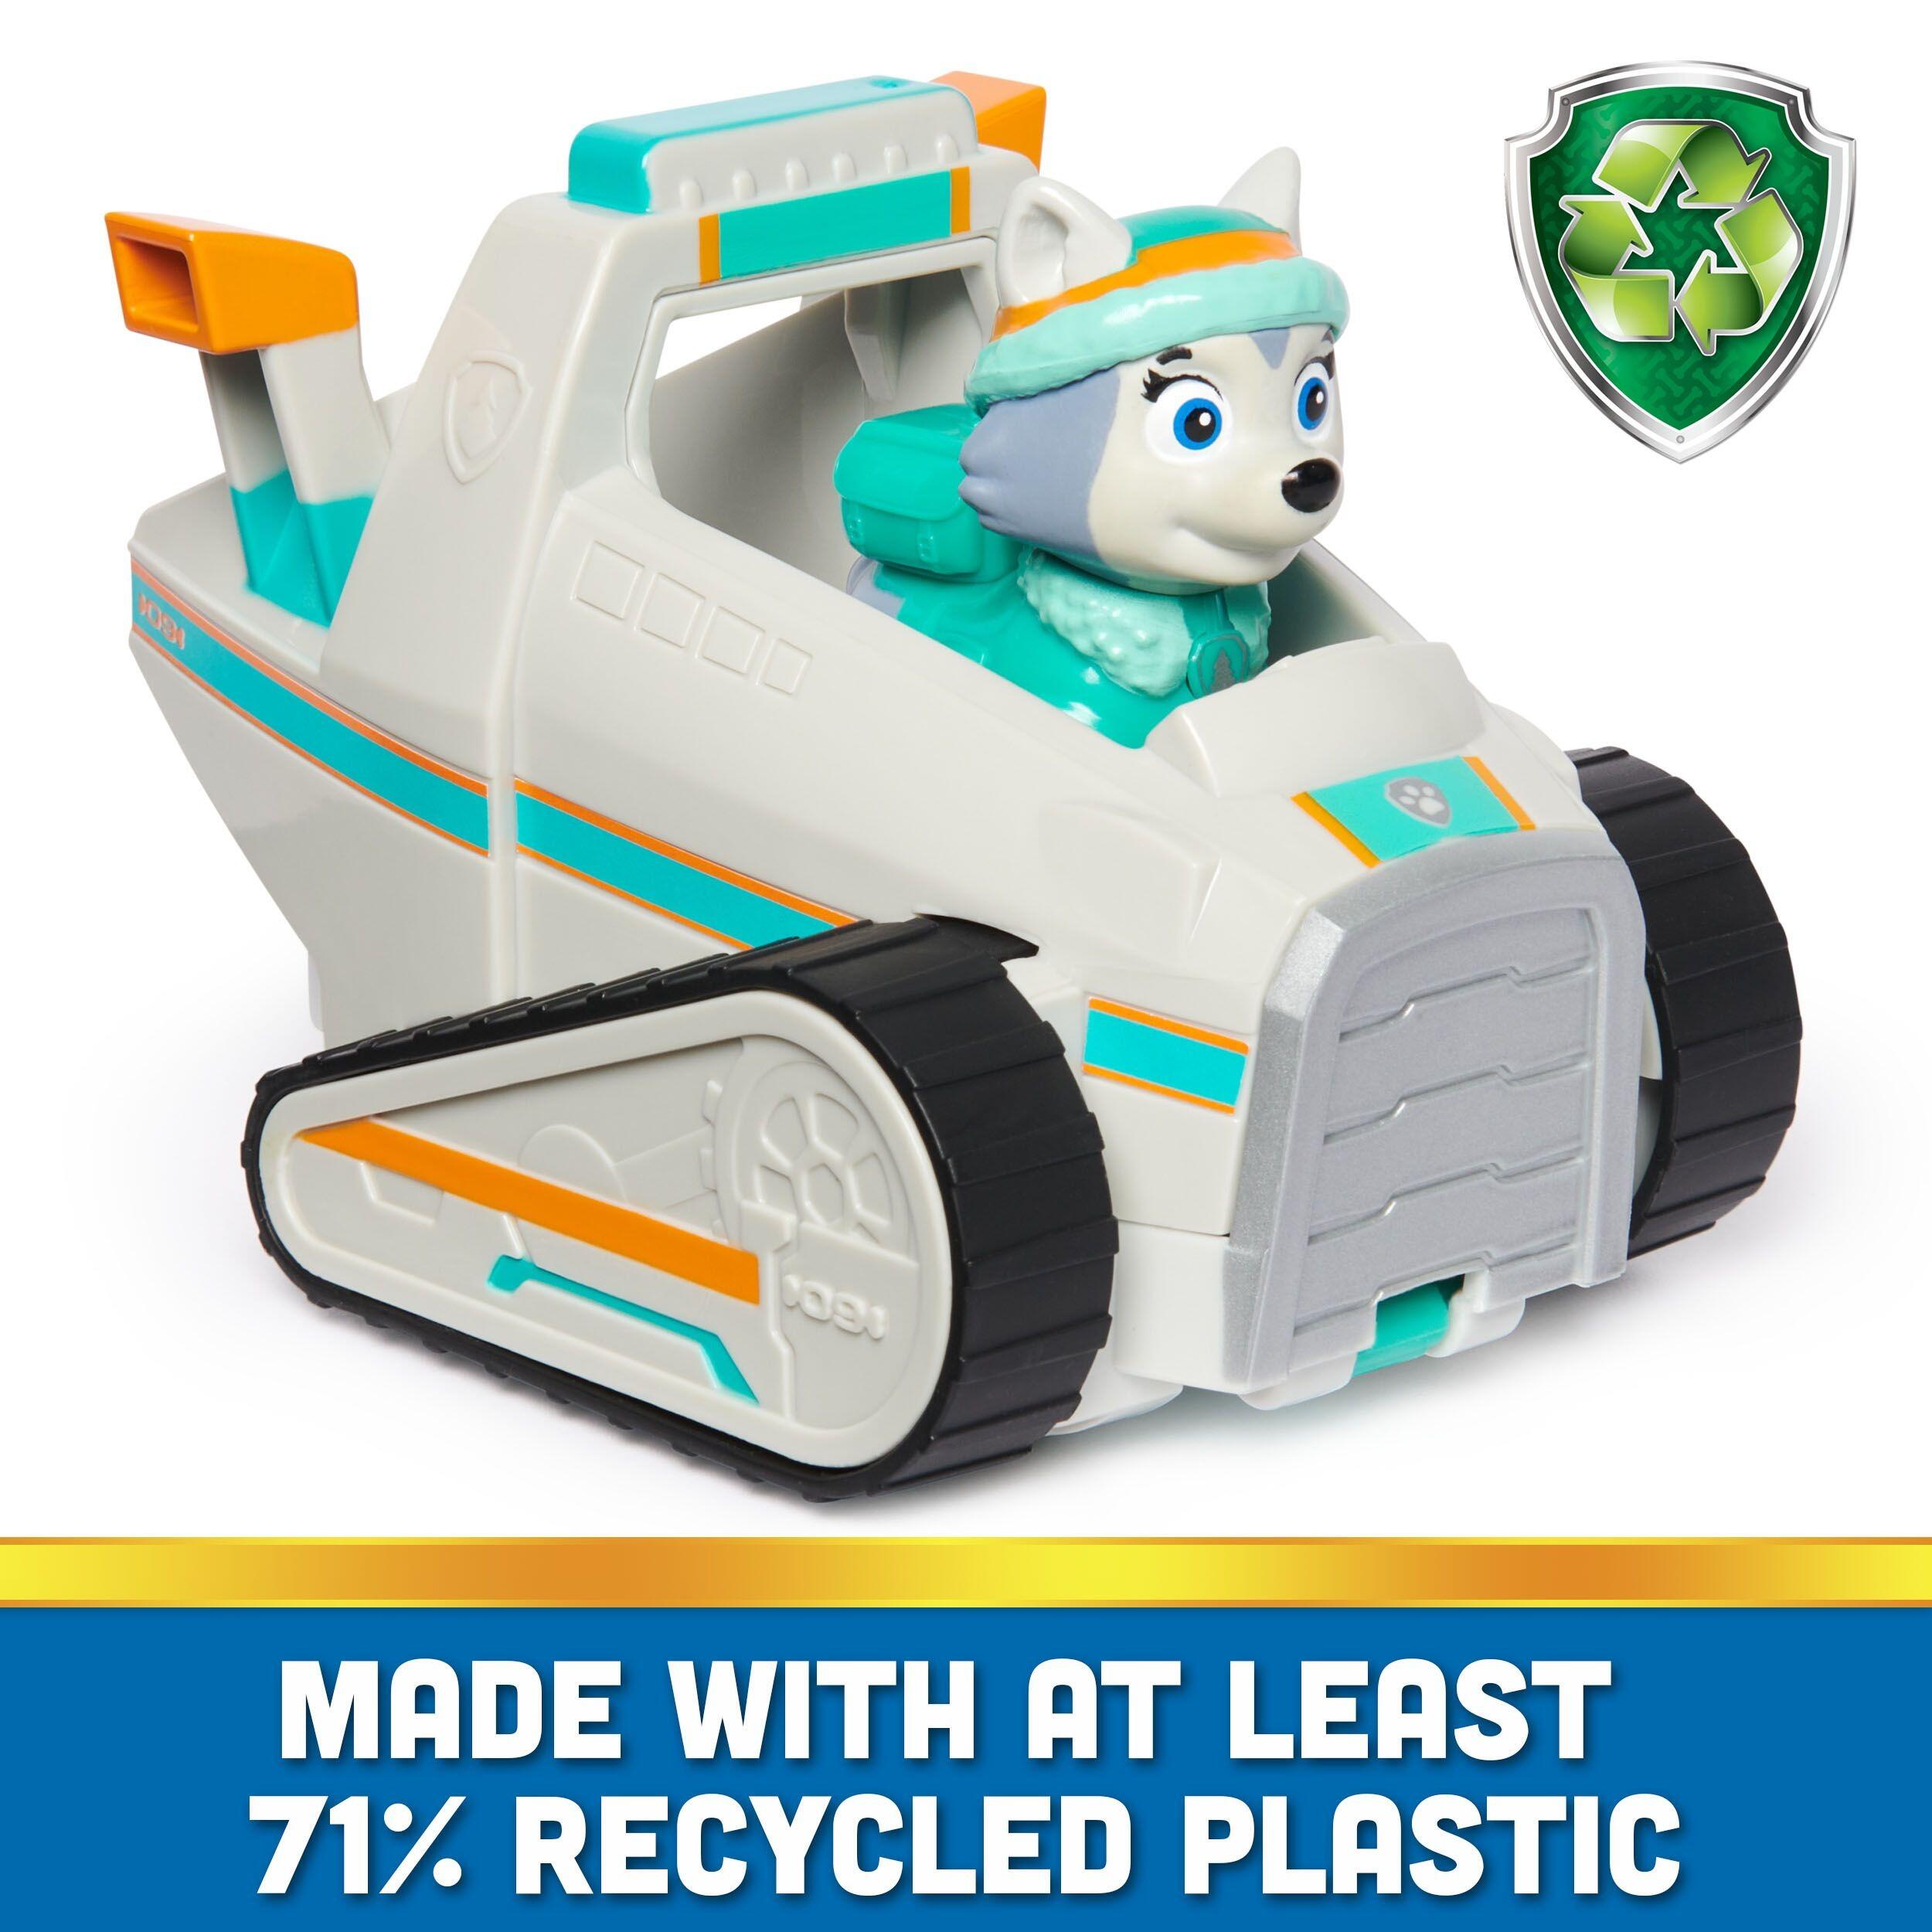 Paw Patrol Everest and Snow Plow